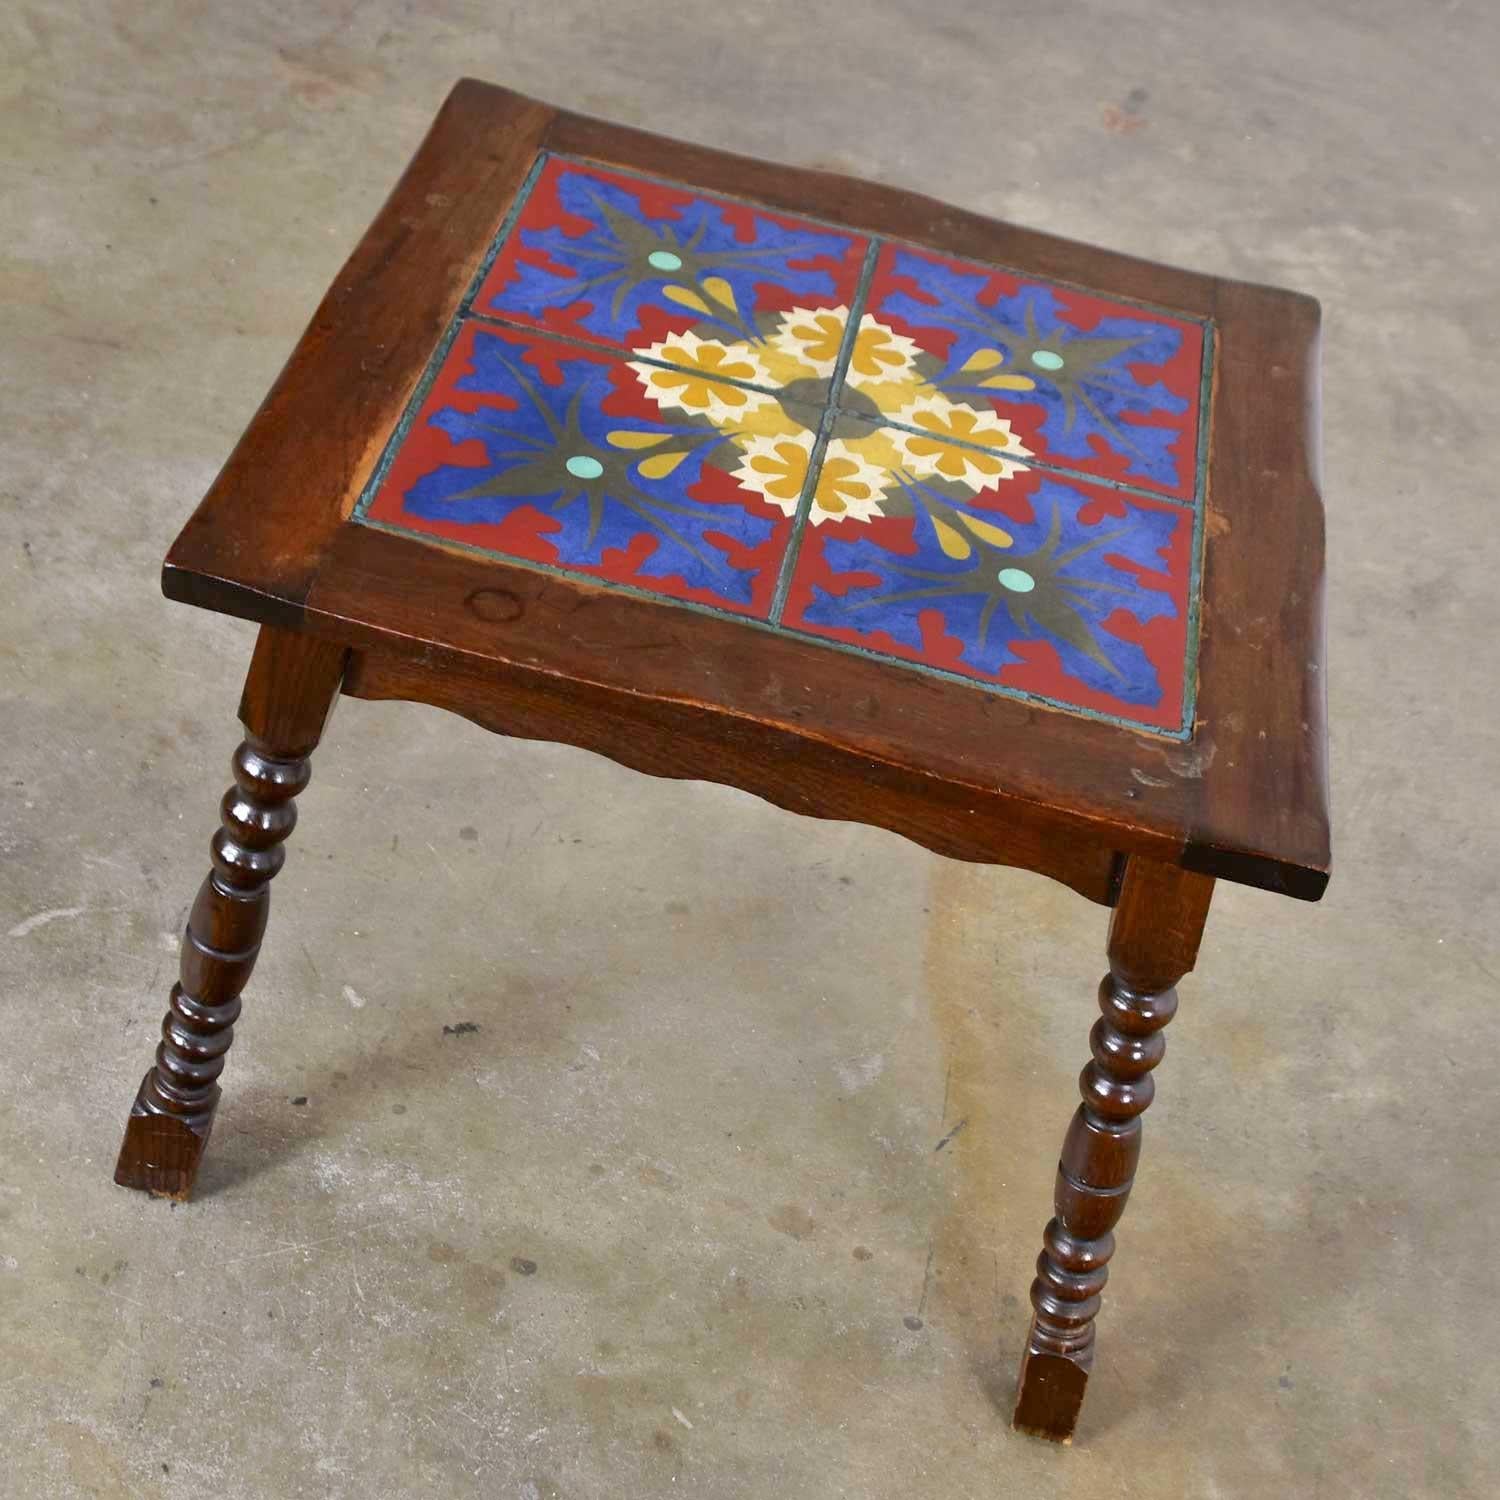 Table d'appoint Catalina California ou Mission Arts & Craft Style Spanish Tile Top en vente 1